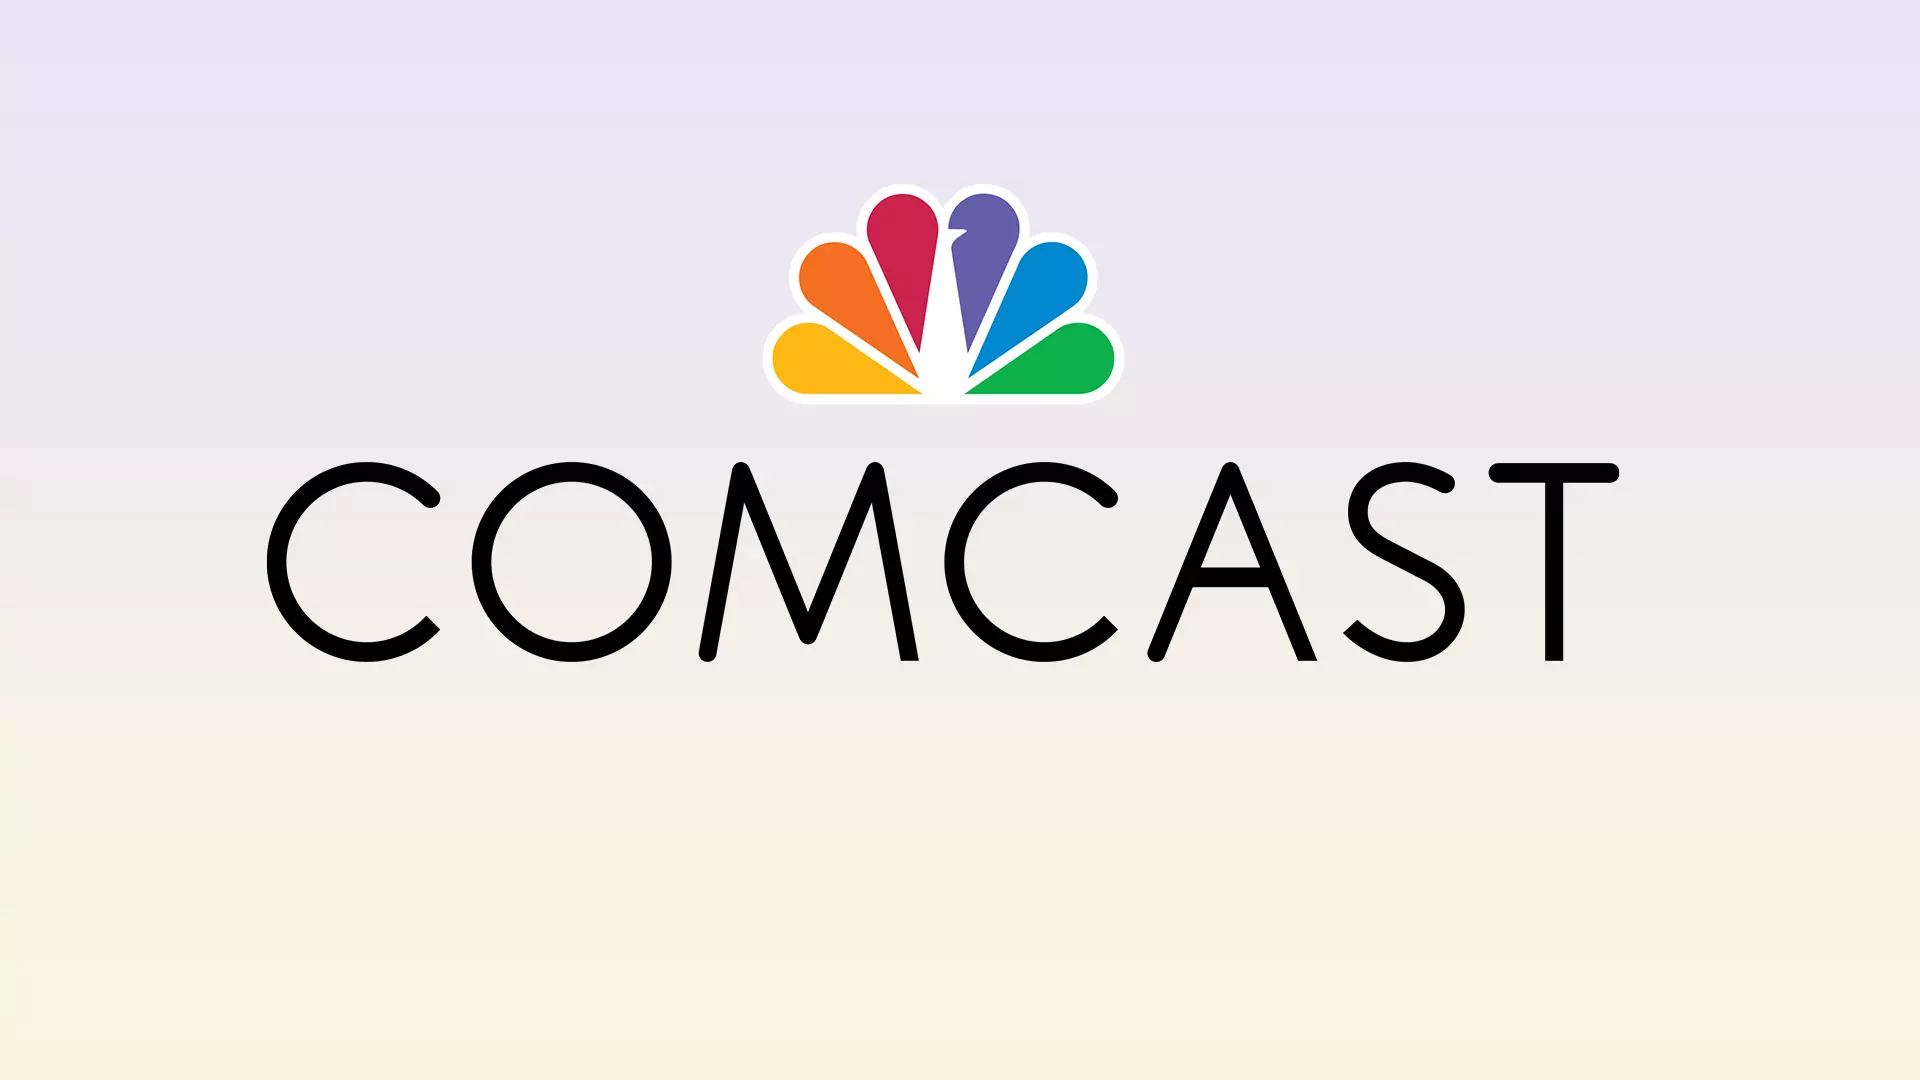 Comcast launches 2 Gbps internet service in four states